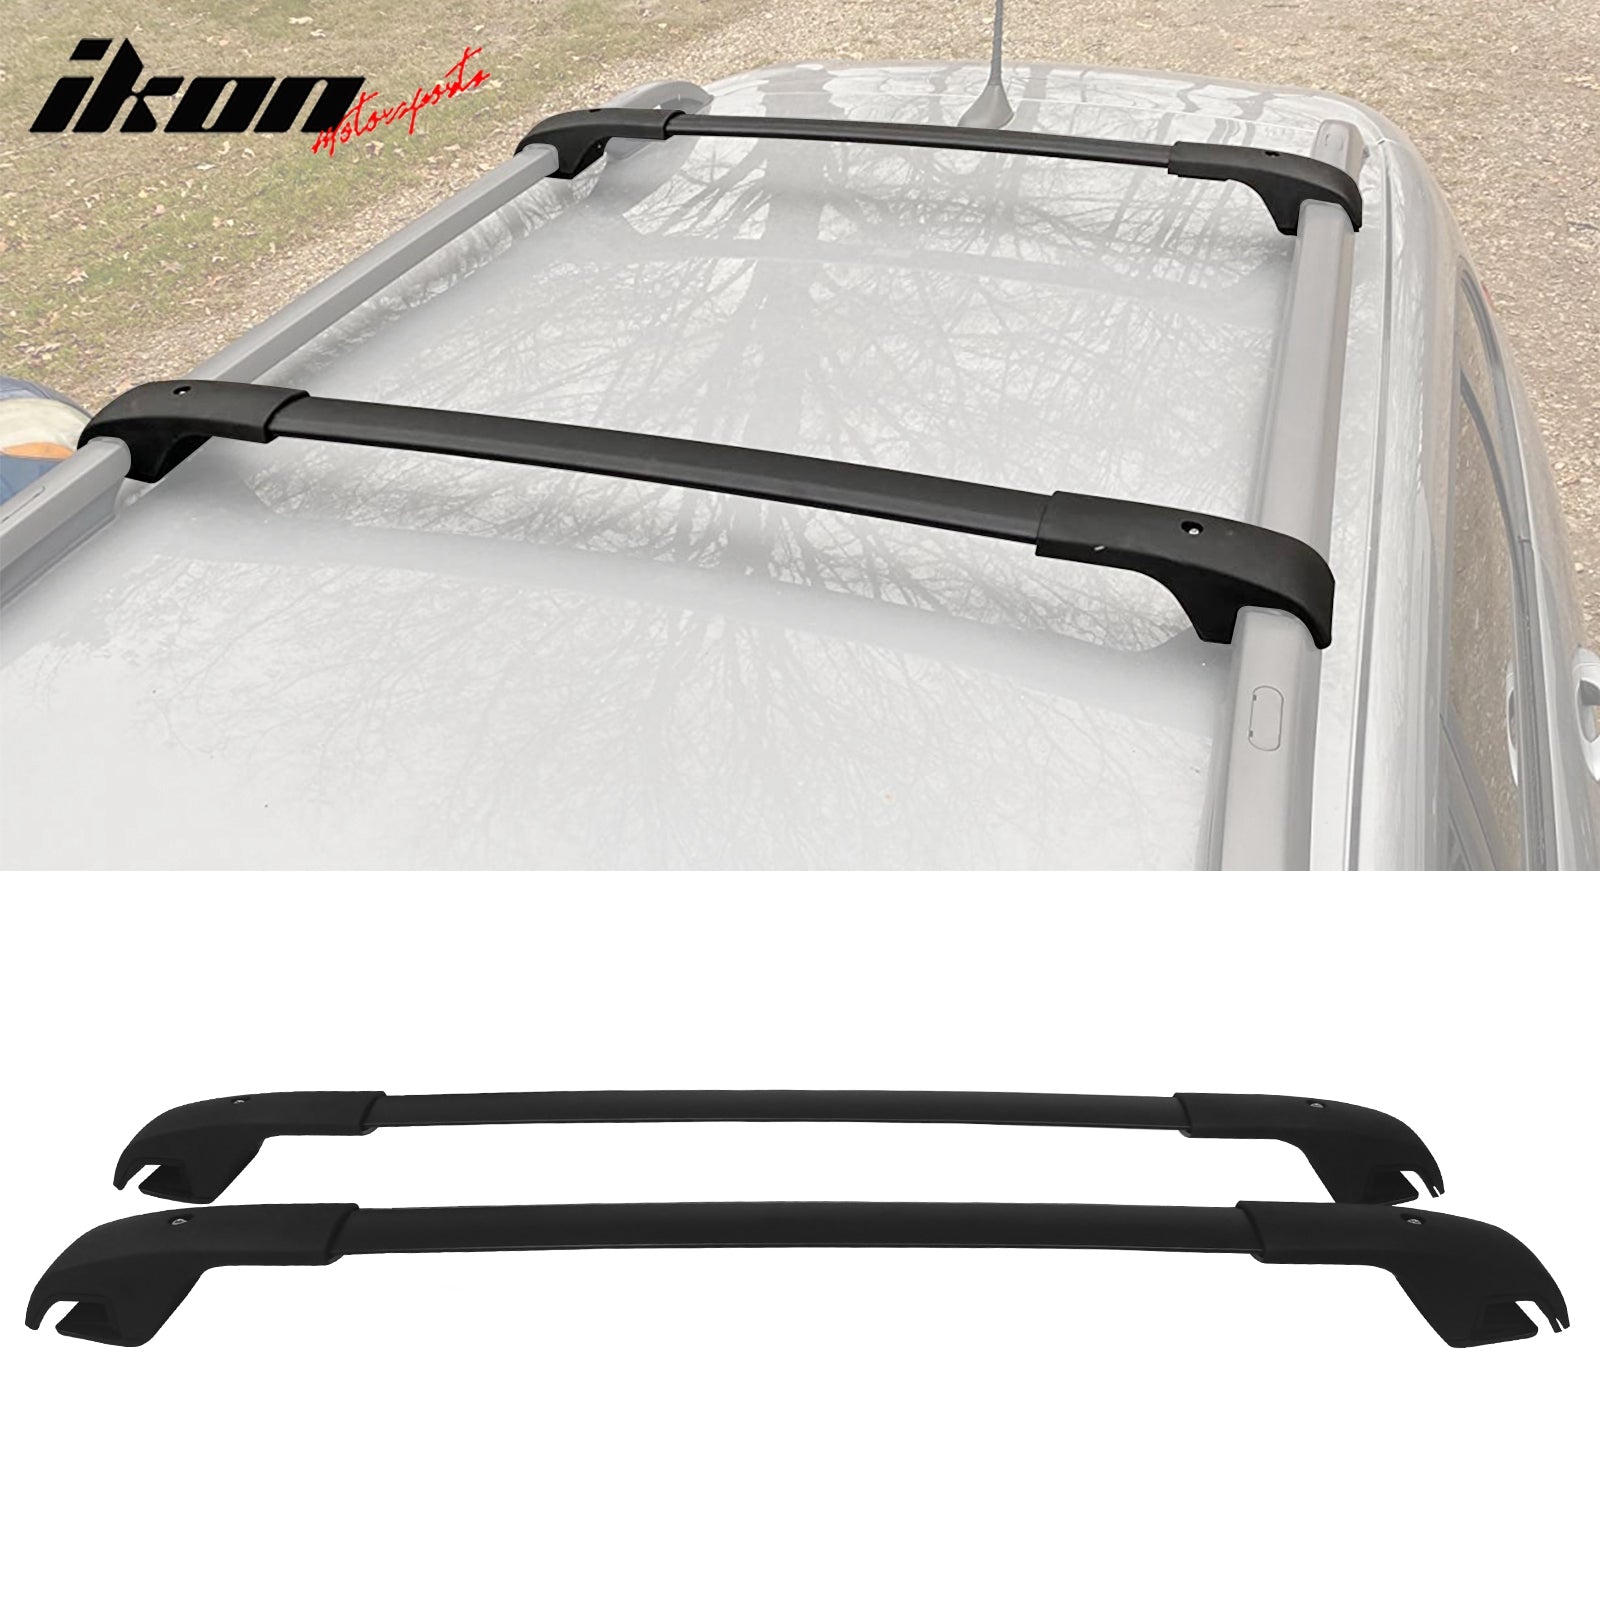 IKON MOTORSPORTS, Roof Rack Compatible With 2014-2023 Jeep Cherokee (Will Not Fit Grand Cherokee), Black Top Roof Rack Cross Bar Cargo Luggage Carrier Aluminum 2PCS